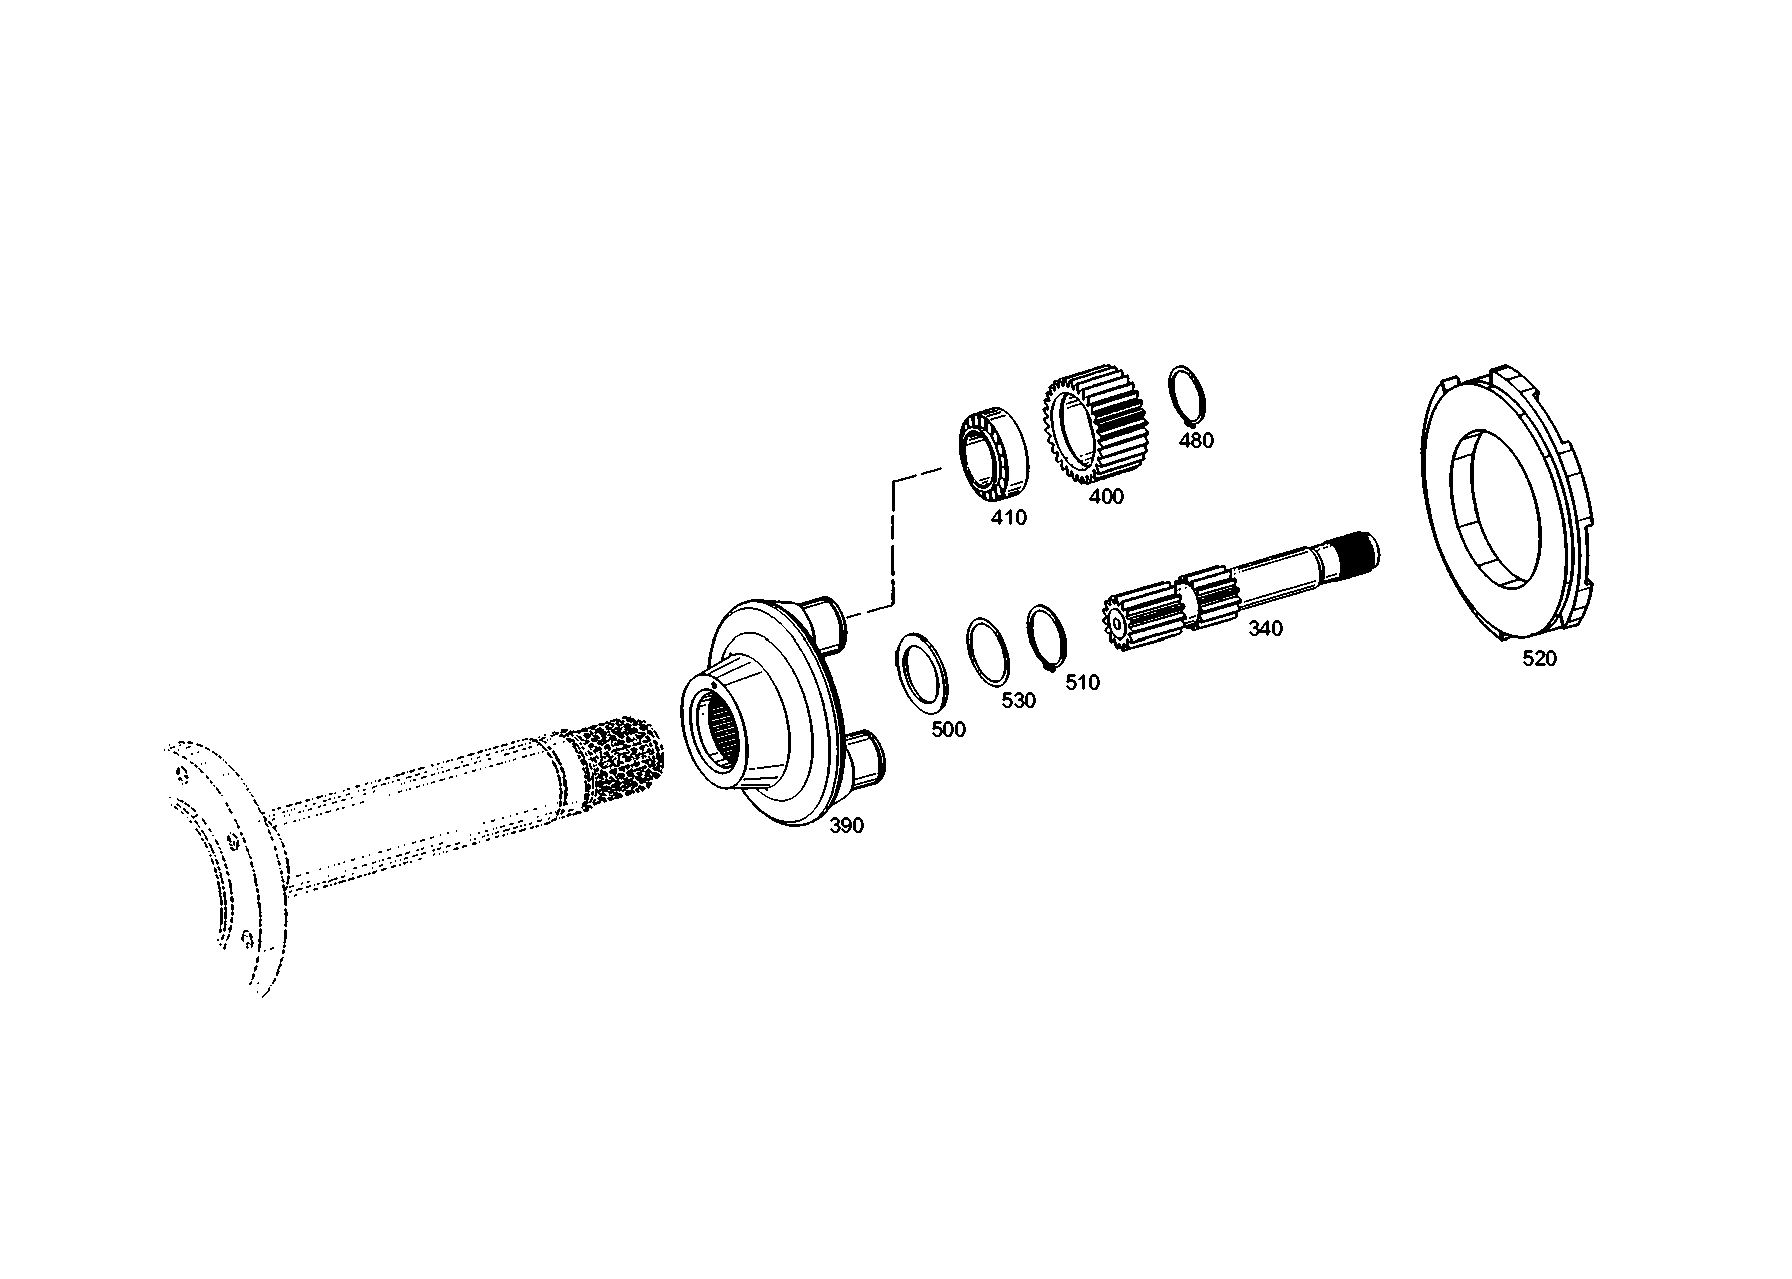 drawing for HAMM AG 1282417 - WASHER (figure 4)